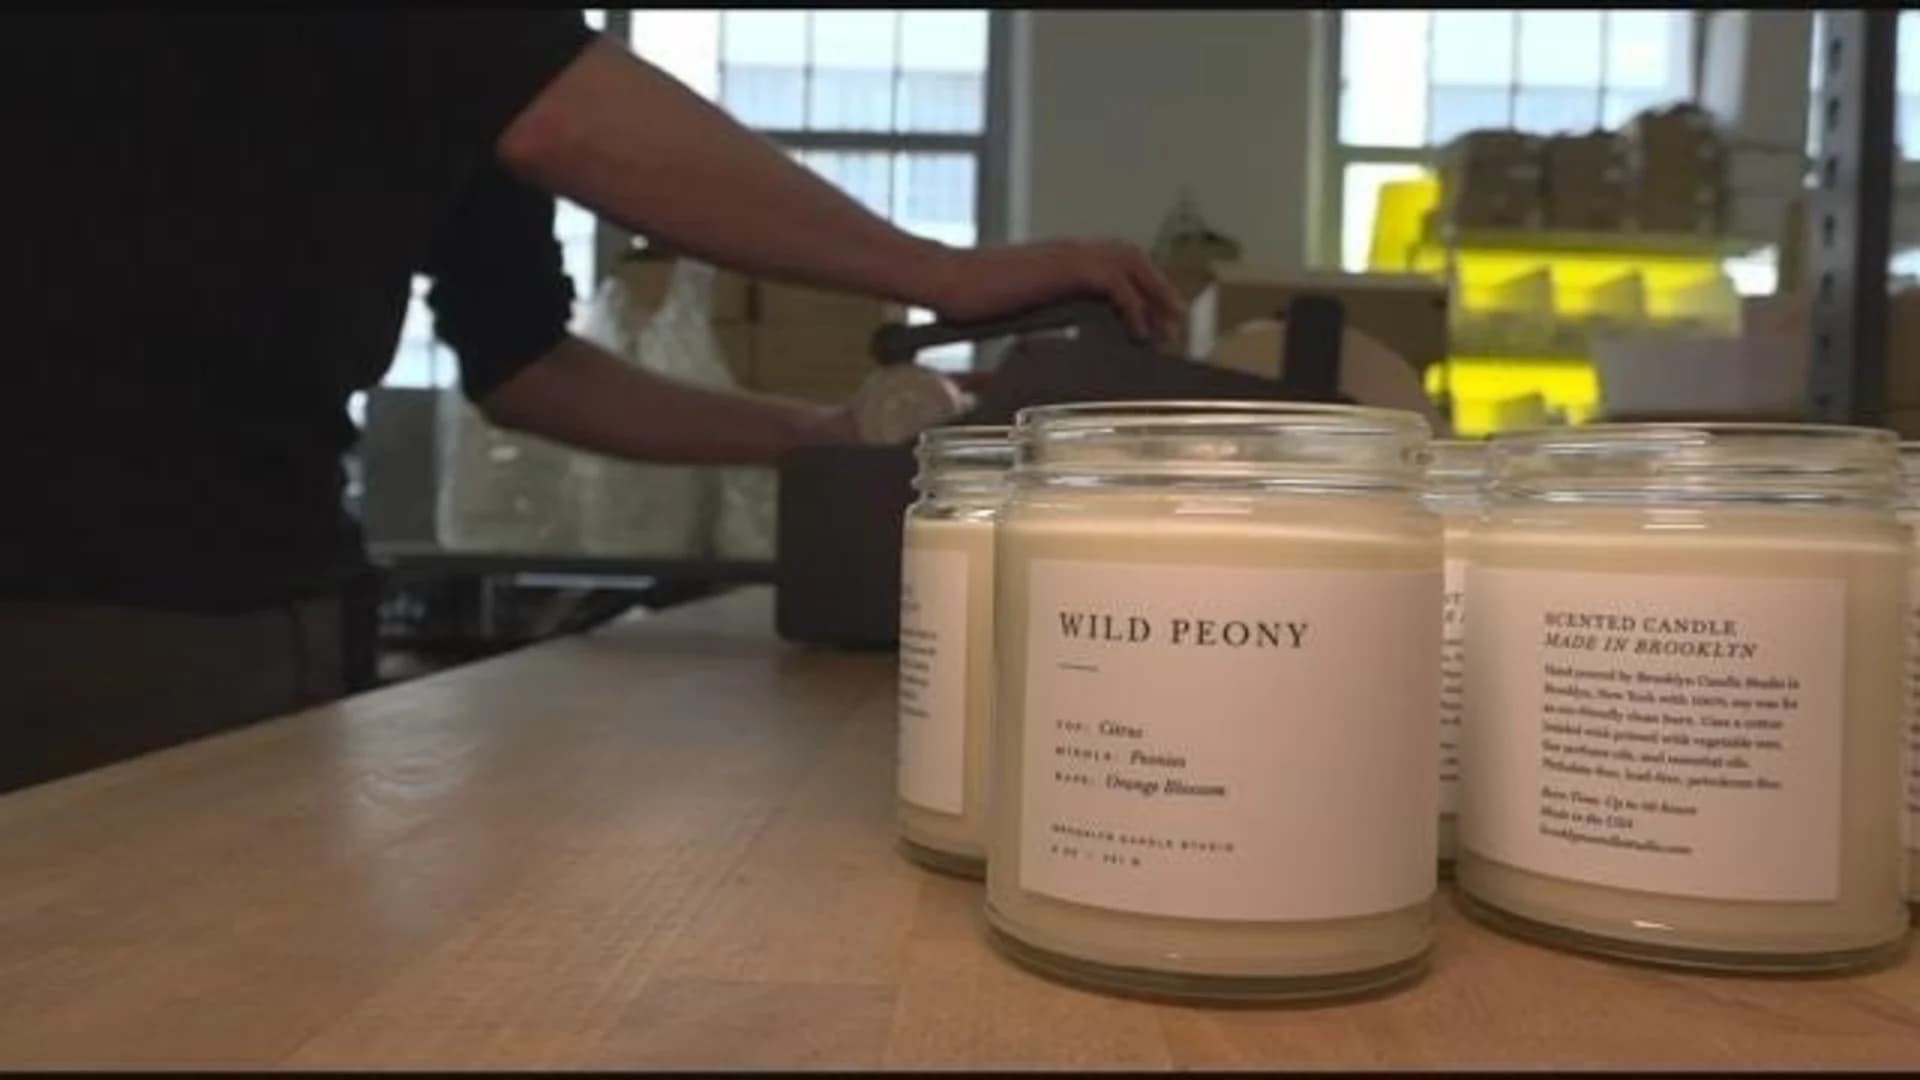 Experience, adventure inspire scents at Industry City candle studio